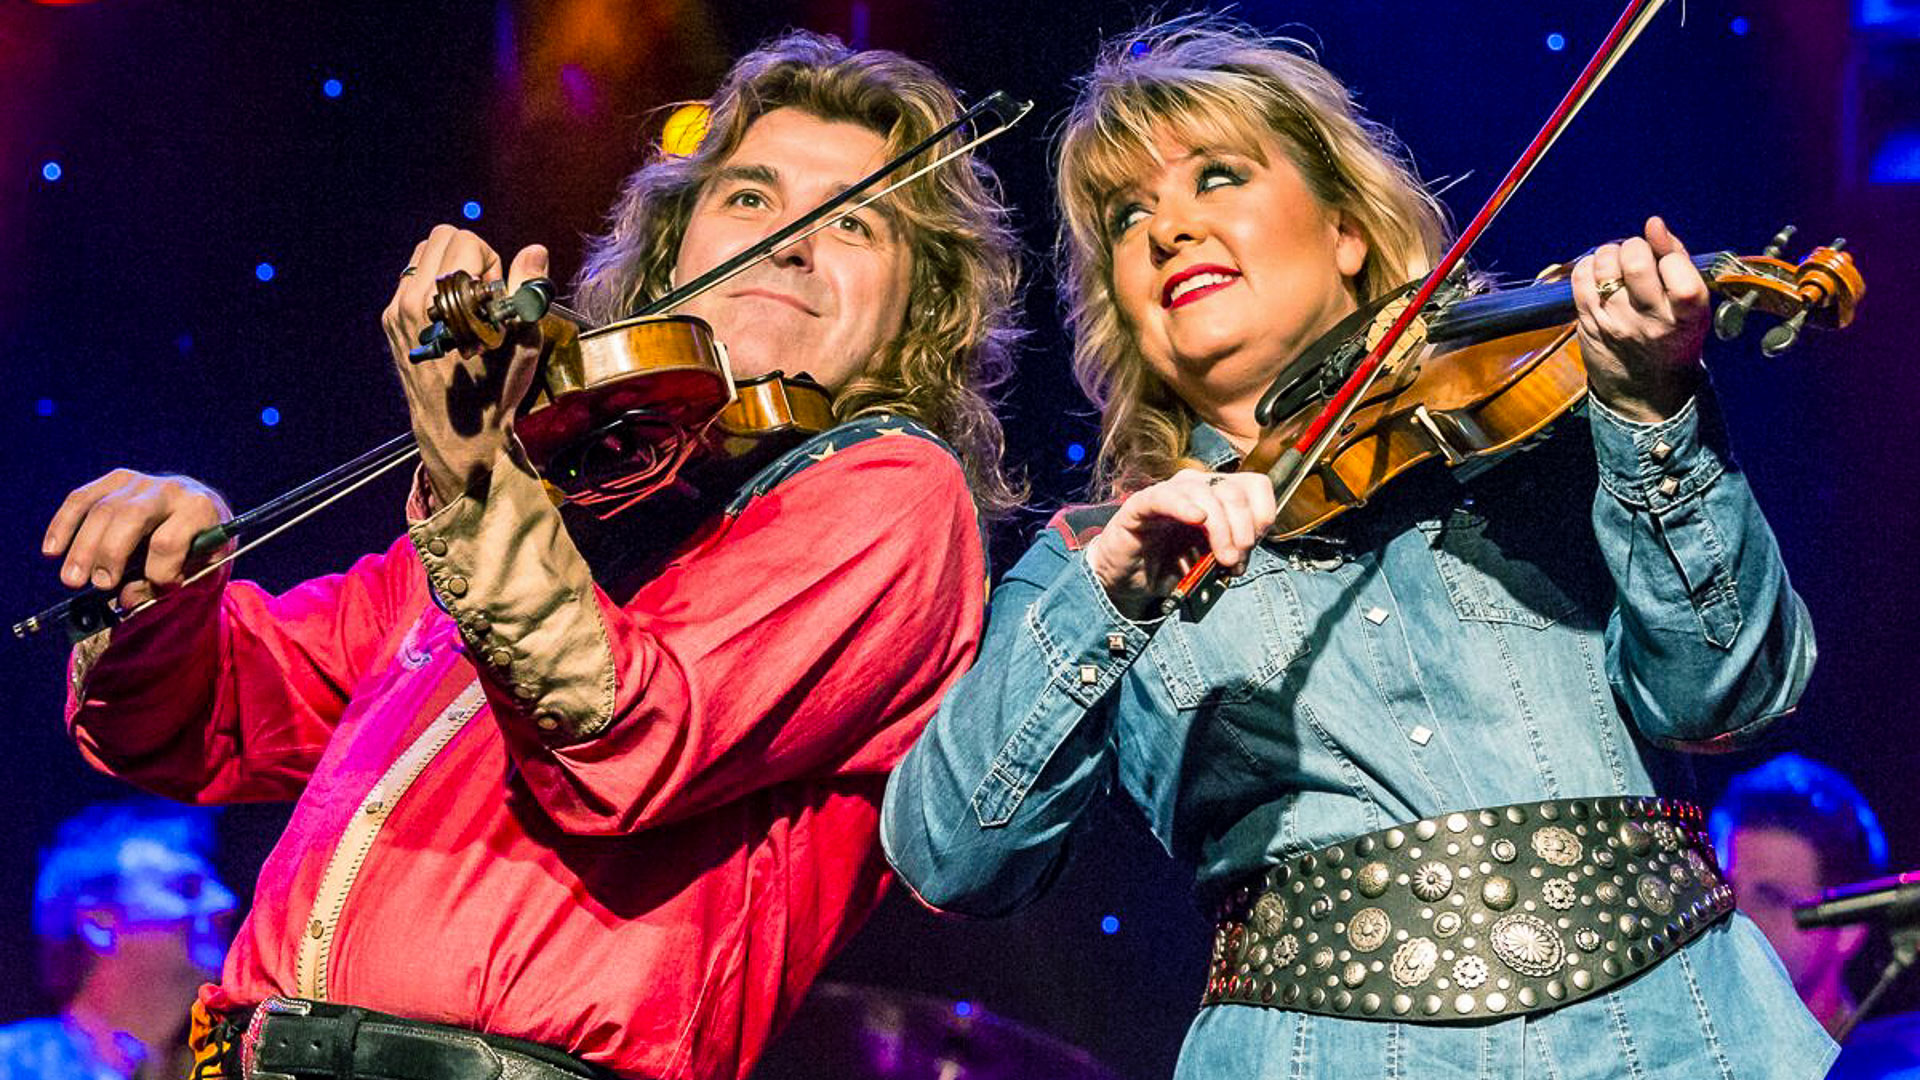 190213 Down Home Country Wayne Melody Fiddles - Wayne Massengale and Melody Hart - Branson's Fiddling Sweethearts